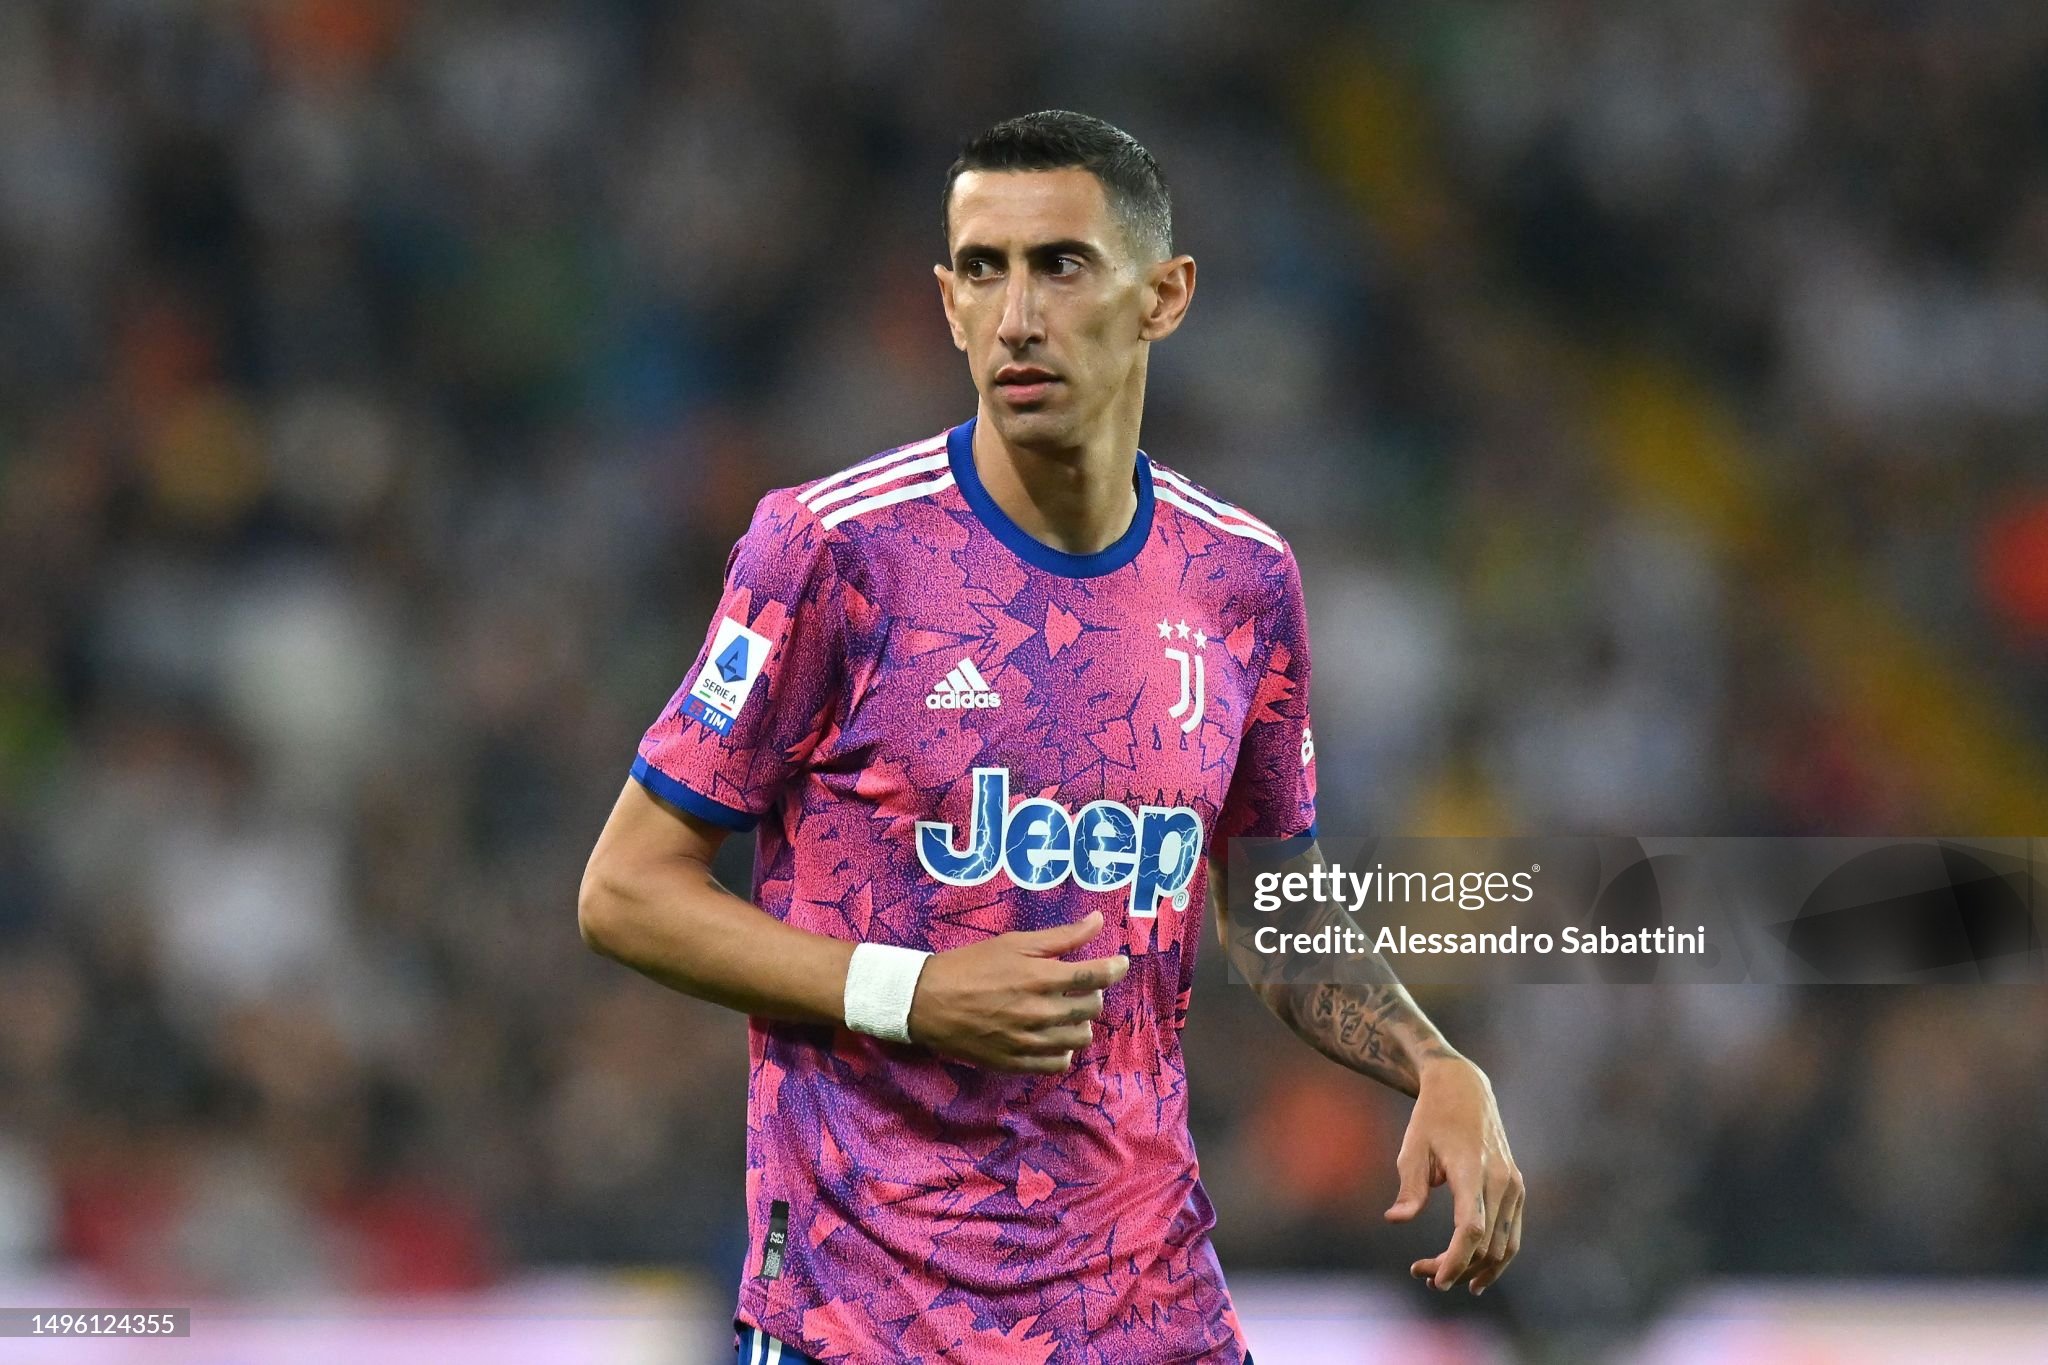 World Cup winner confirms Juventus exit